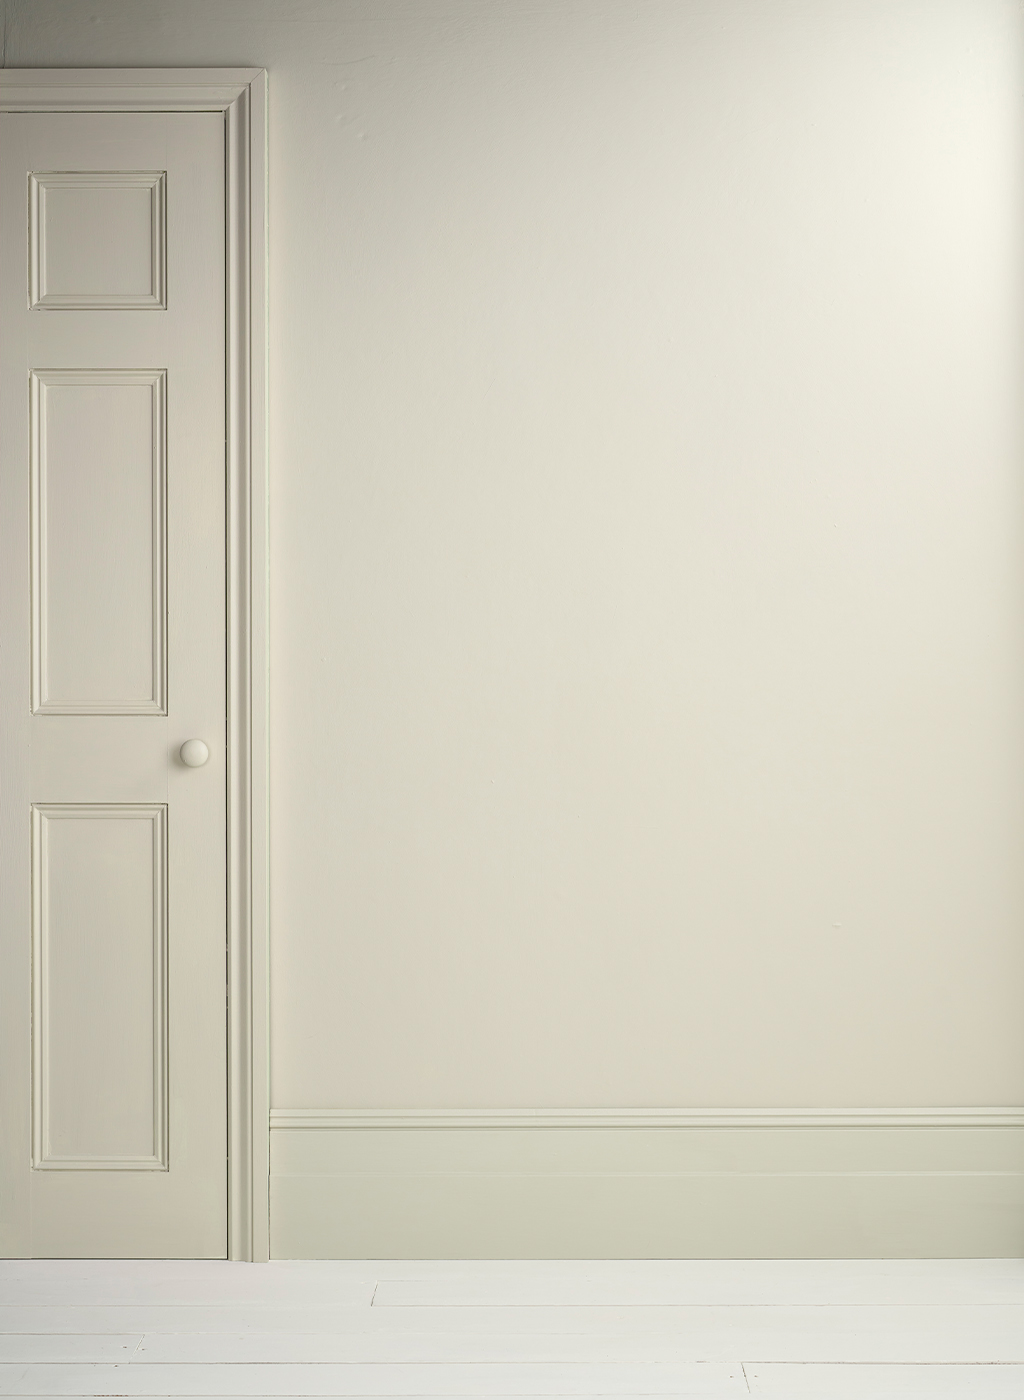 Lifestyle Image of Annie Sloan Satin Paint in Cotswold Green used on door and skirting